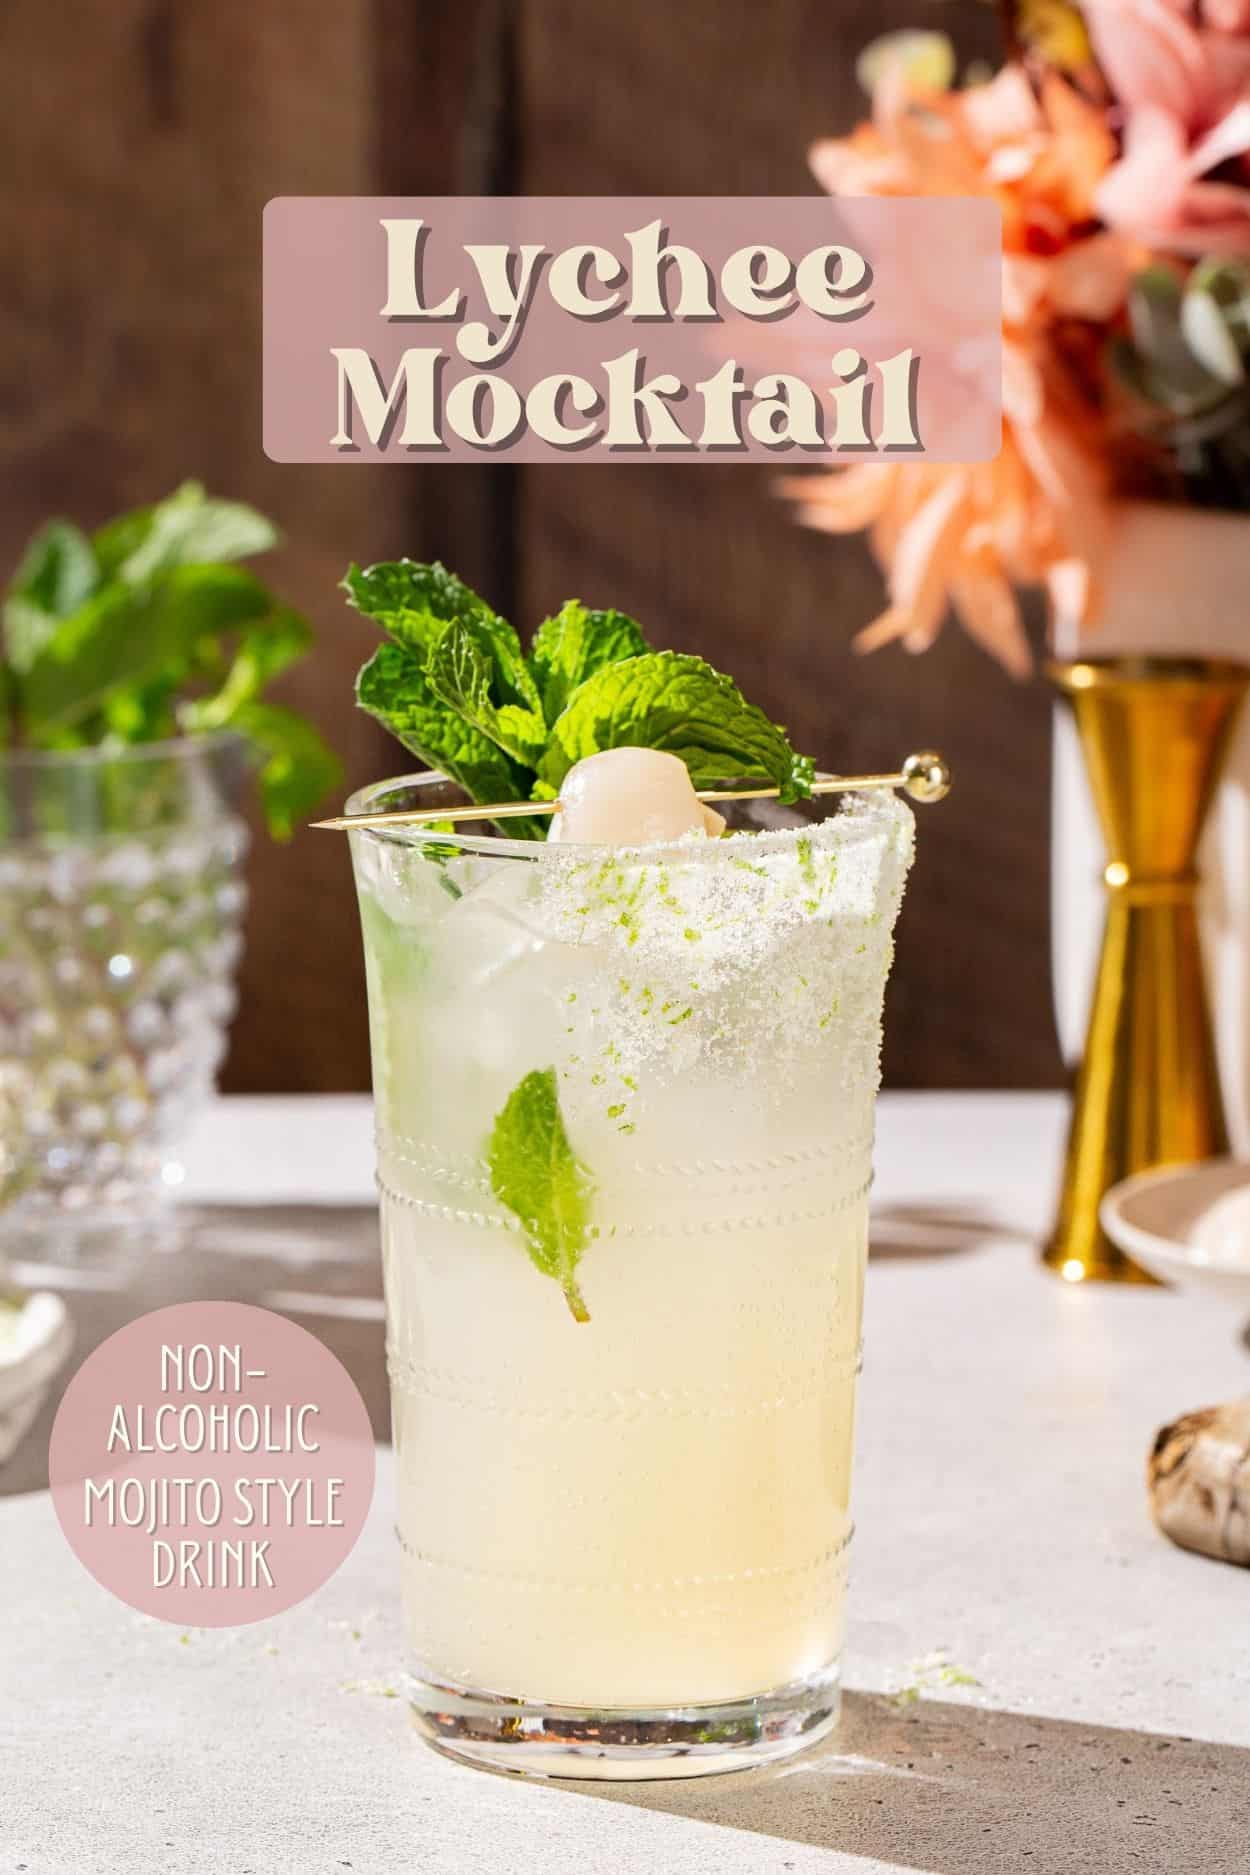 Lychee Mocktail on a countertop with bar tools and ingredients in the background. The drink is in a tall glass and garnished with a whole lychee and mint. Text overlay at the top says “Lychee Mocktail” and at the bottom left says “Non-Alcoholic Mojito Style Drink”.